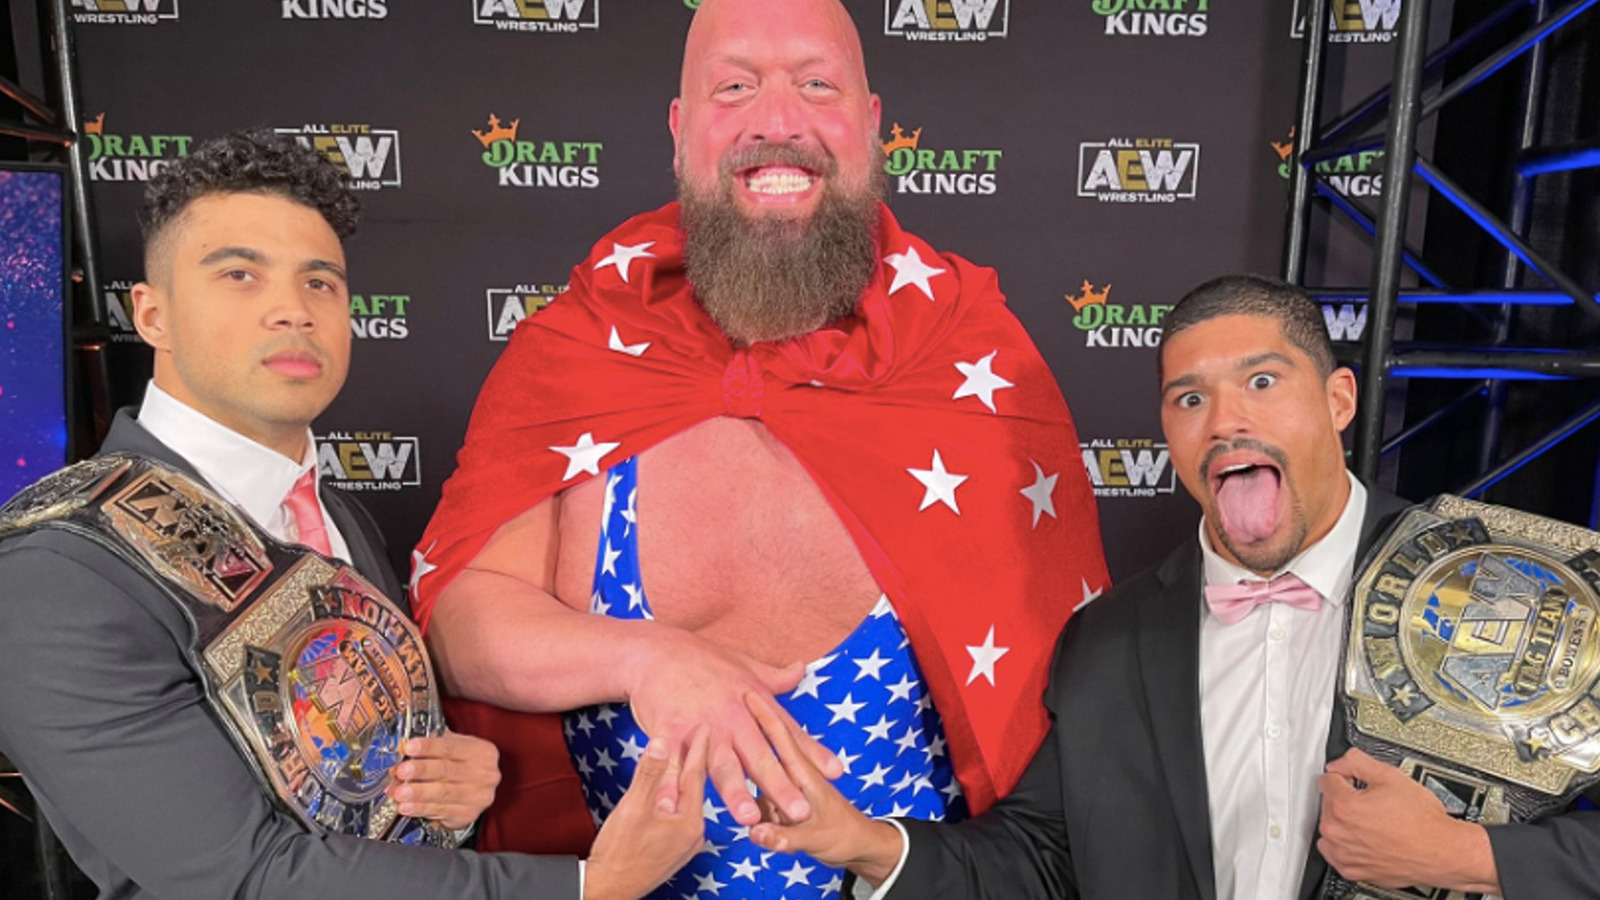 AEW's Paul Wight: 'Going To Have Fun With Captain Insano Before I Hang Up The Boots'